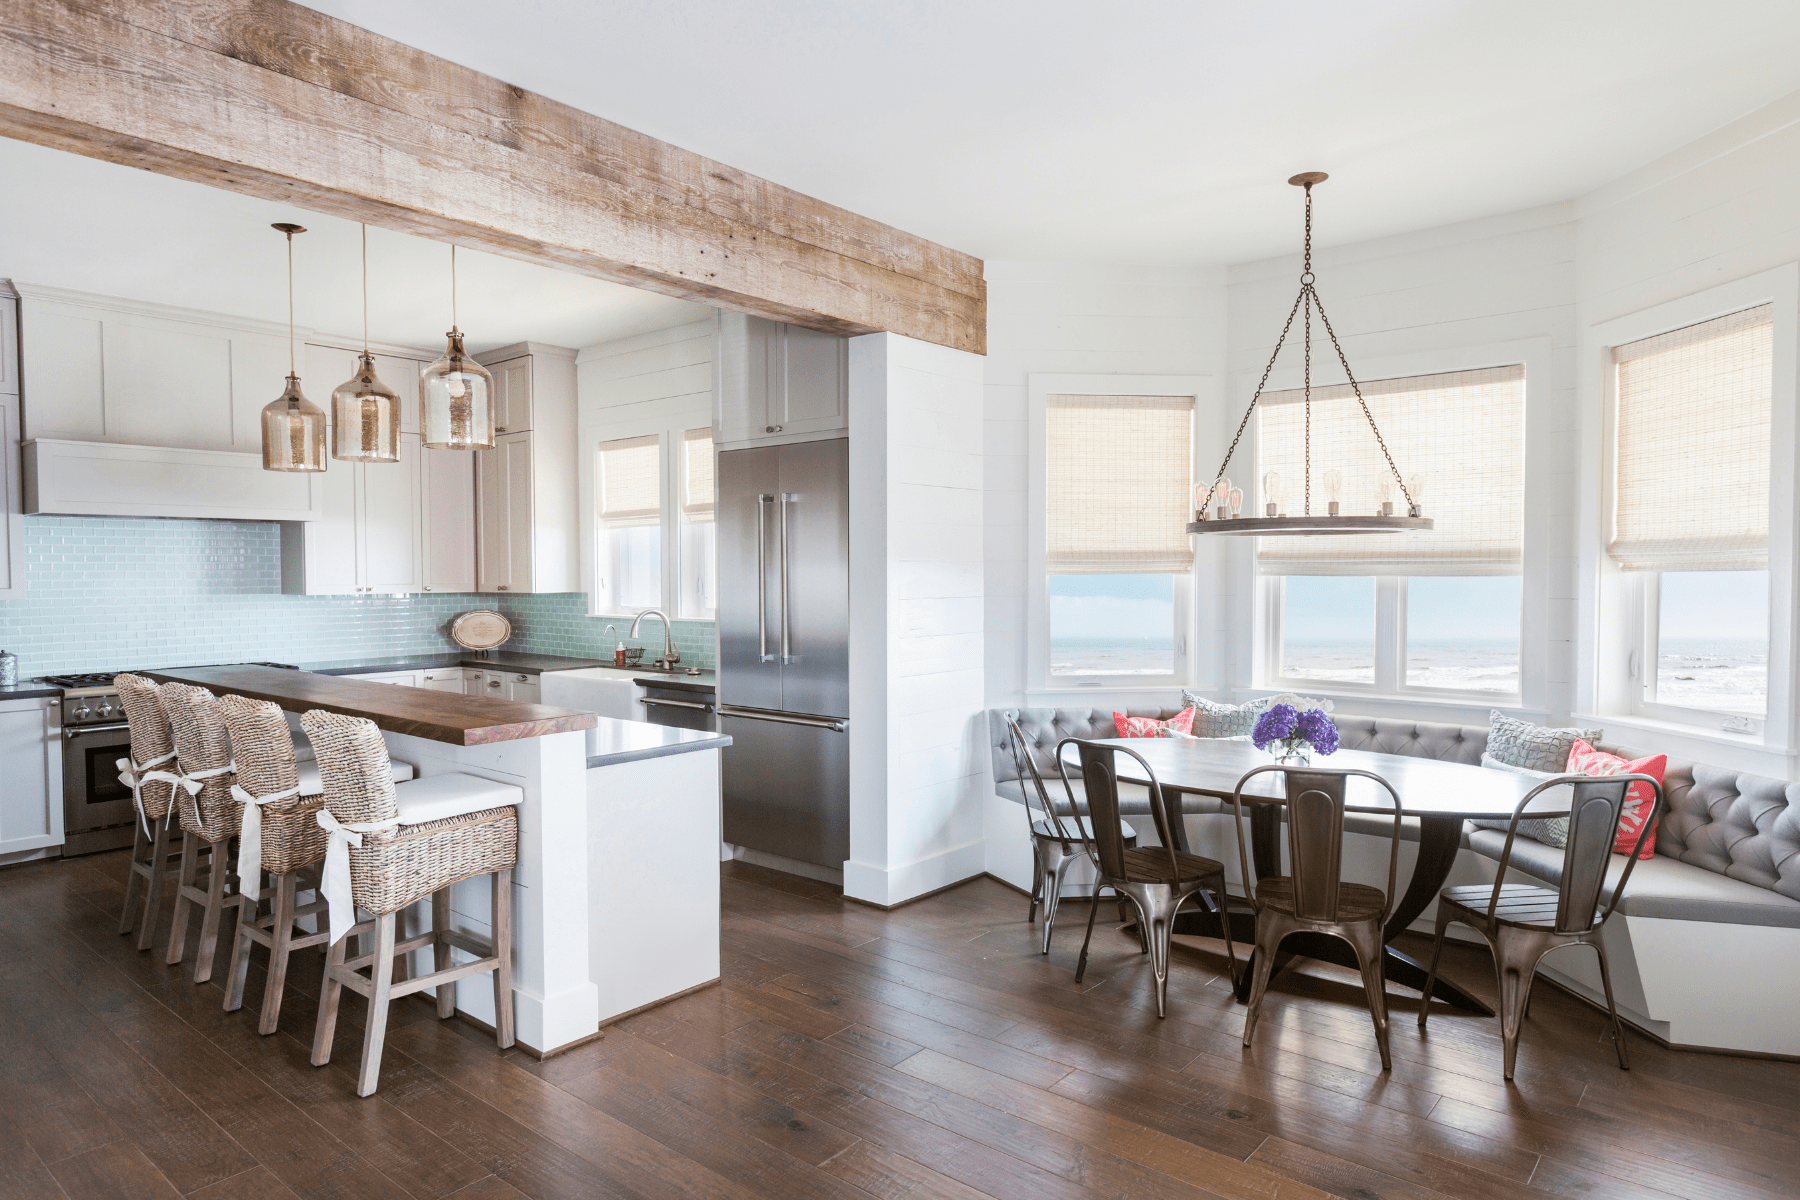 An eat-in kitchen at the Sandhill Shores home featuring a light palette illuminated by sunlight and custom furnishings that bring a cozy feel to the space.